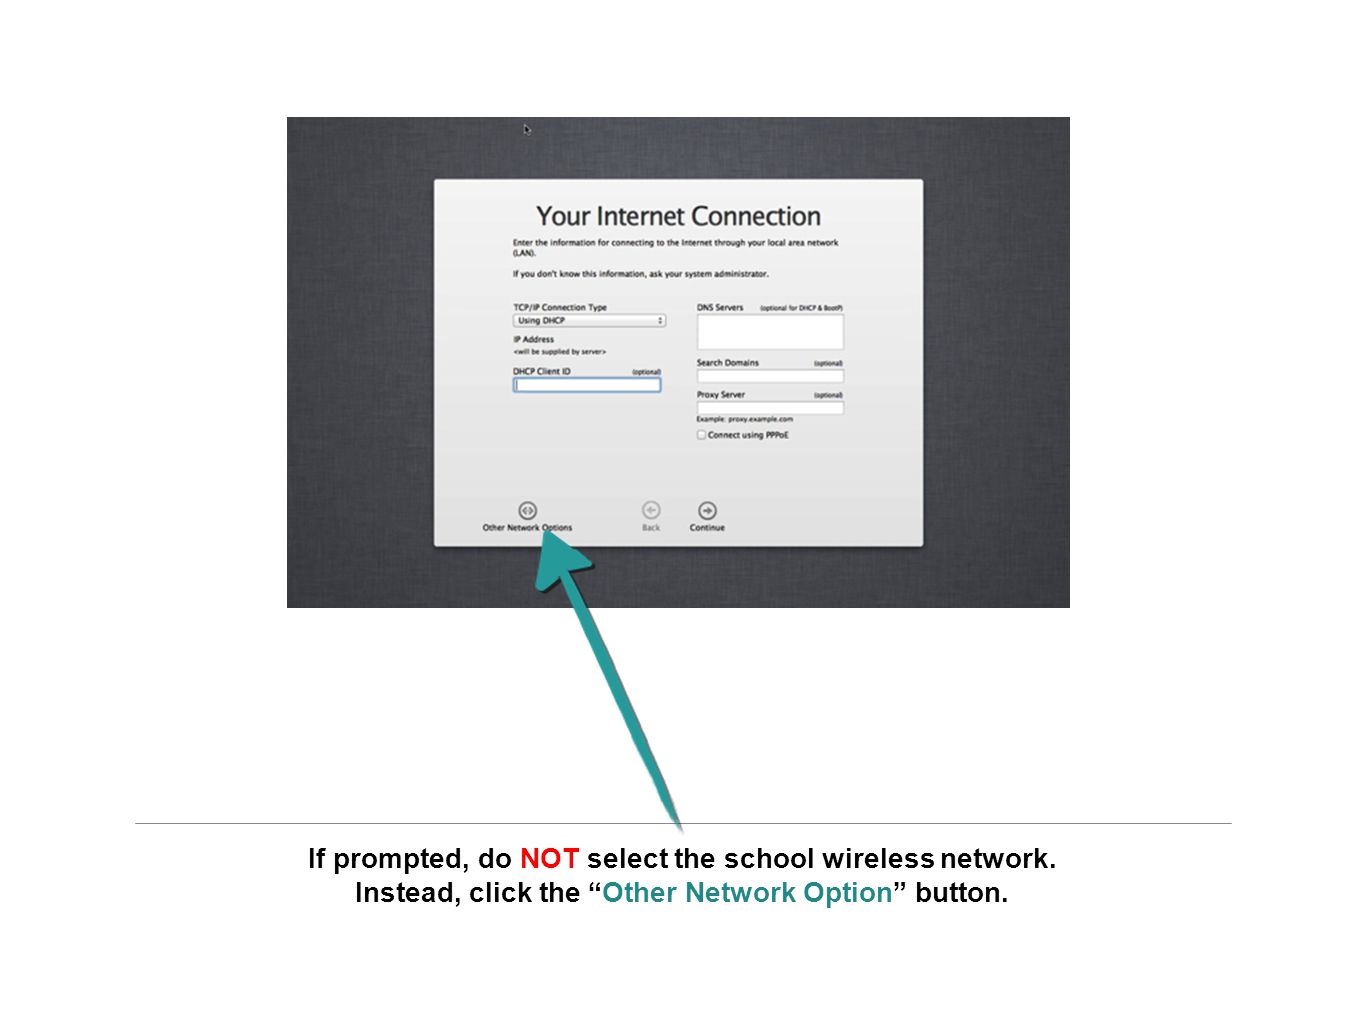 If prompted, do NOT select the school wireless network.